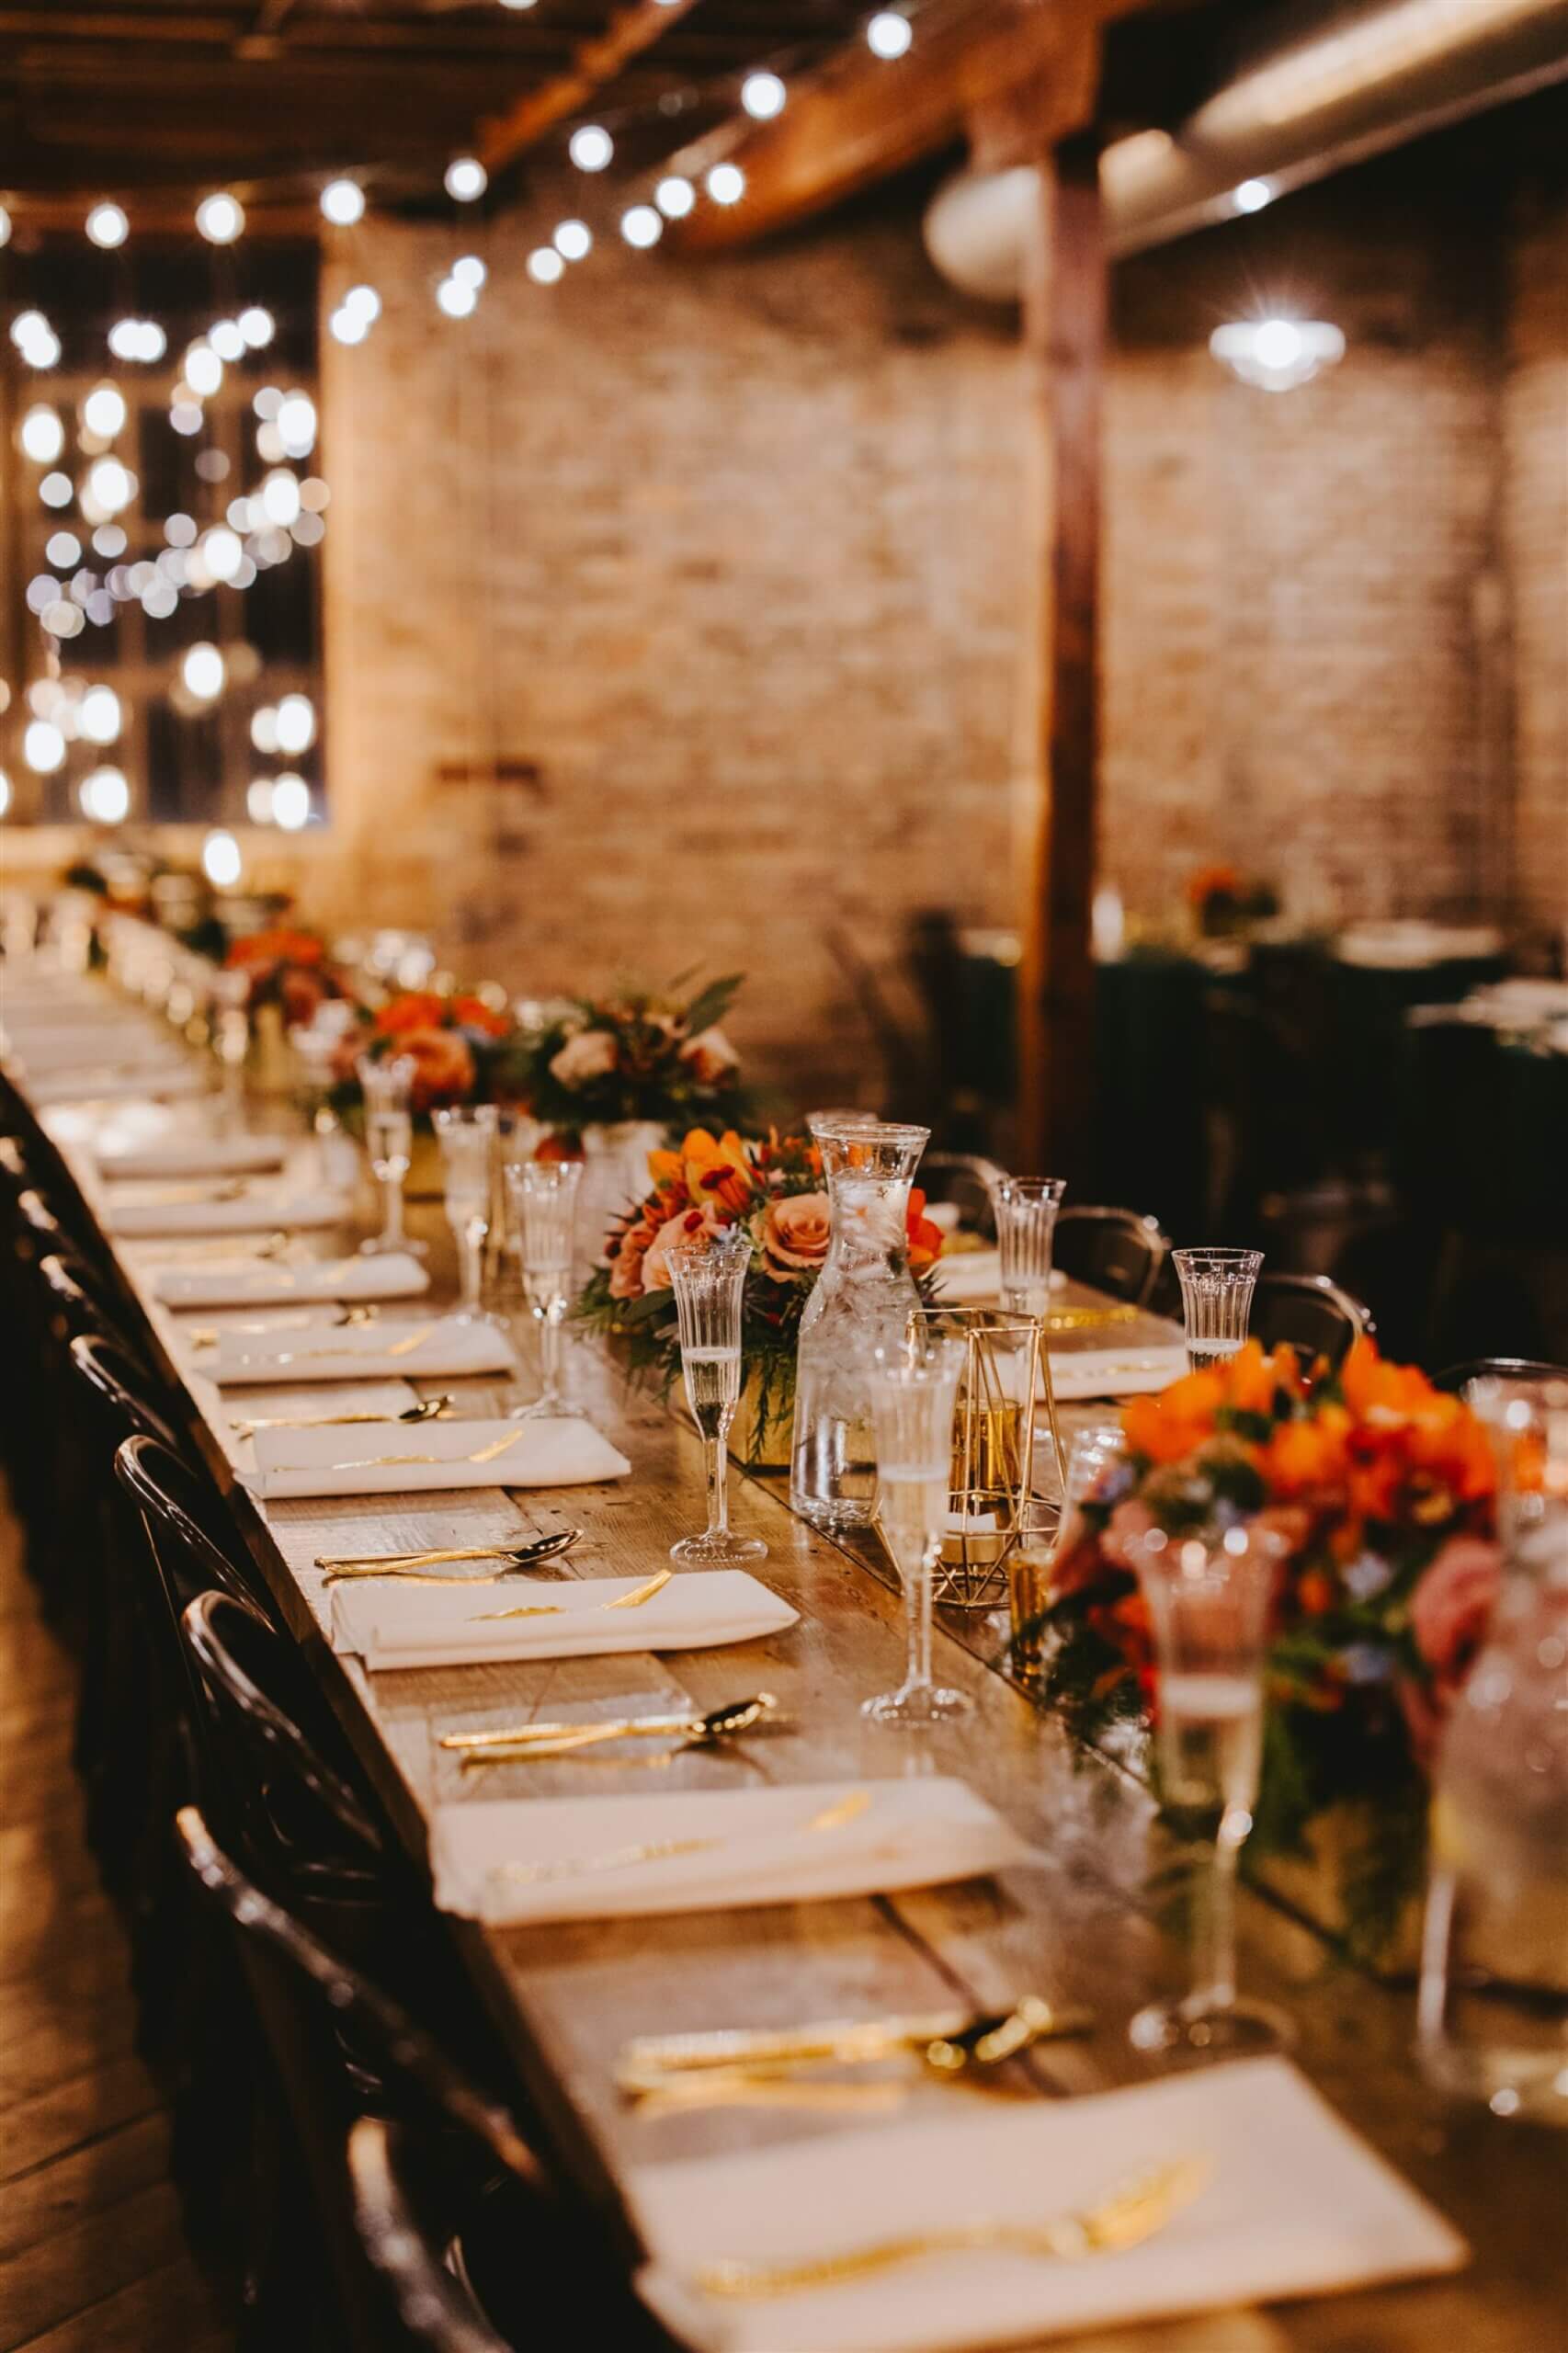 Wedding reception table with gold accents and red, pink, and orange flowers